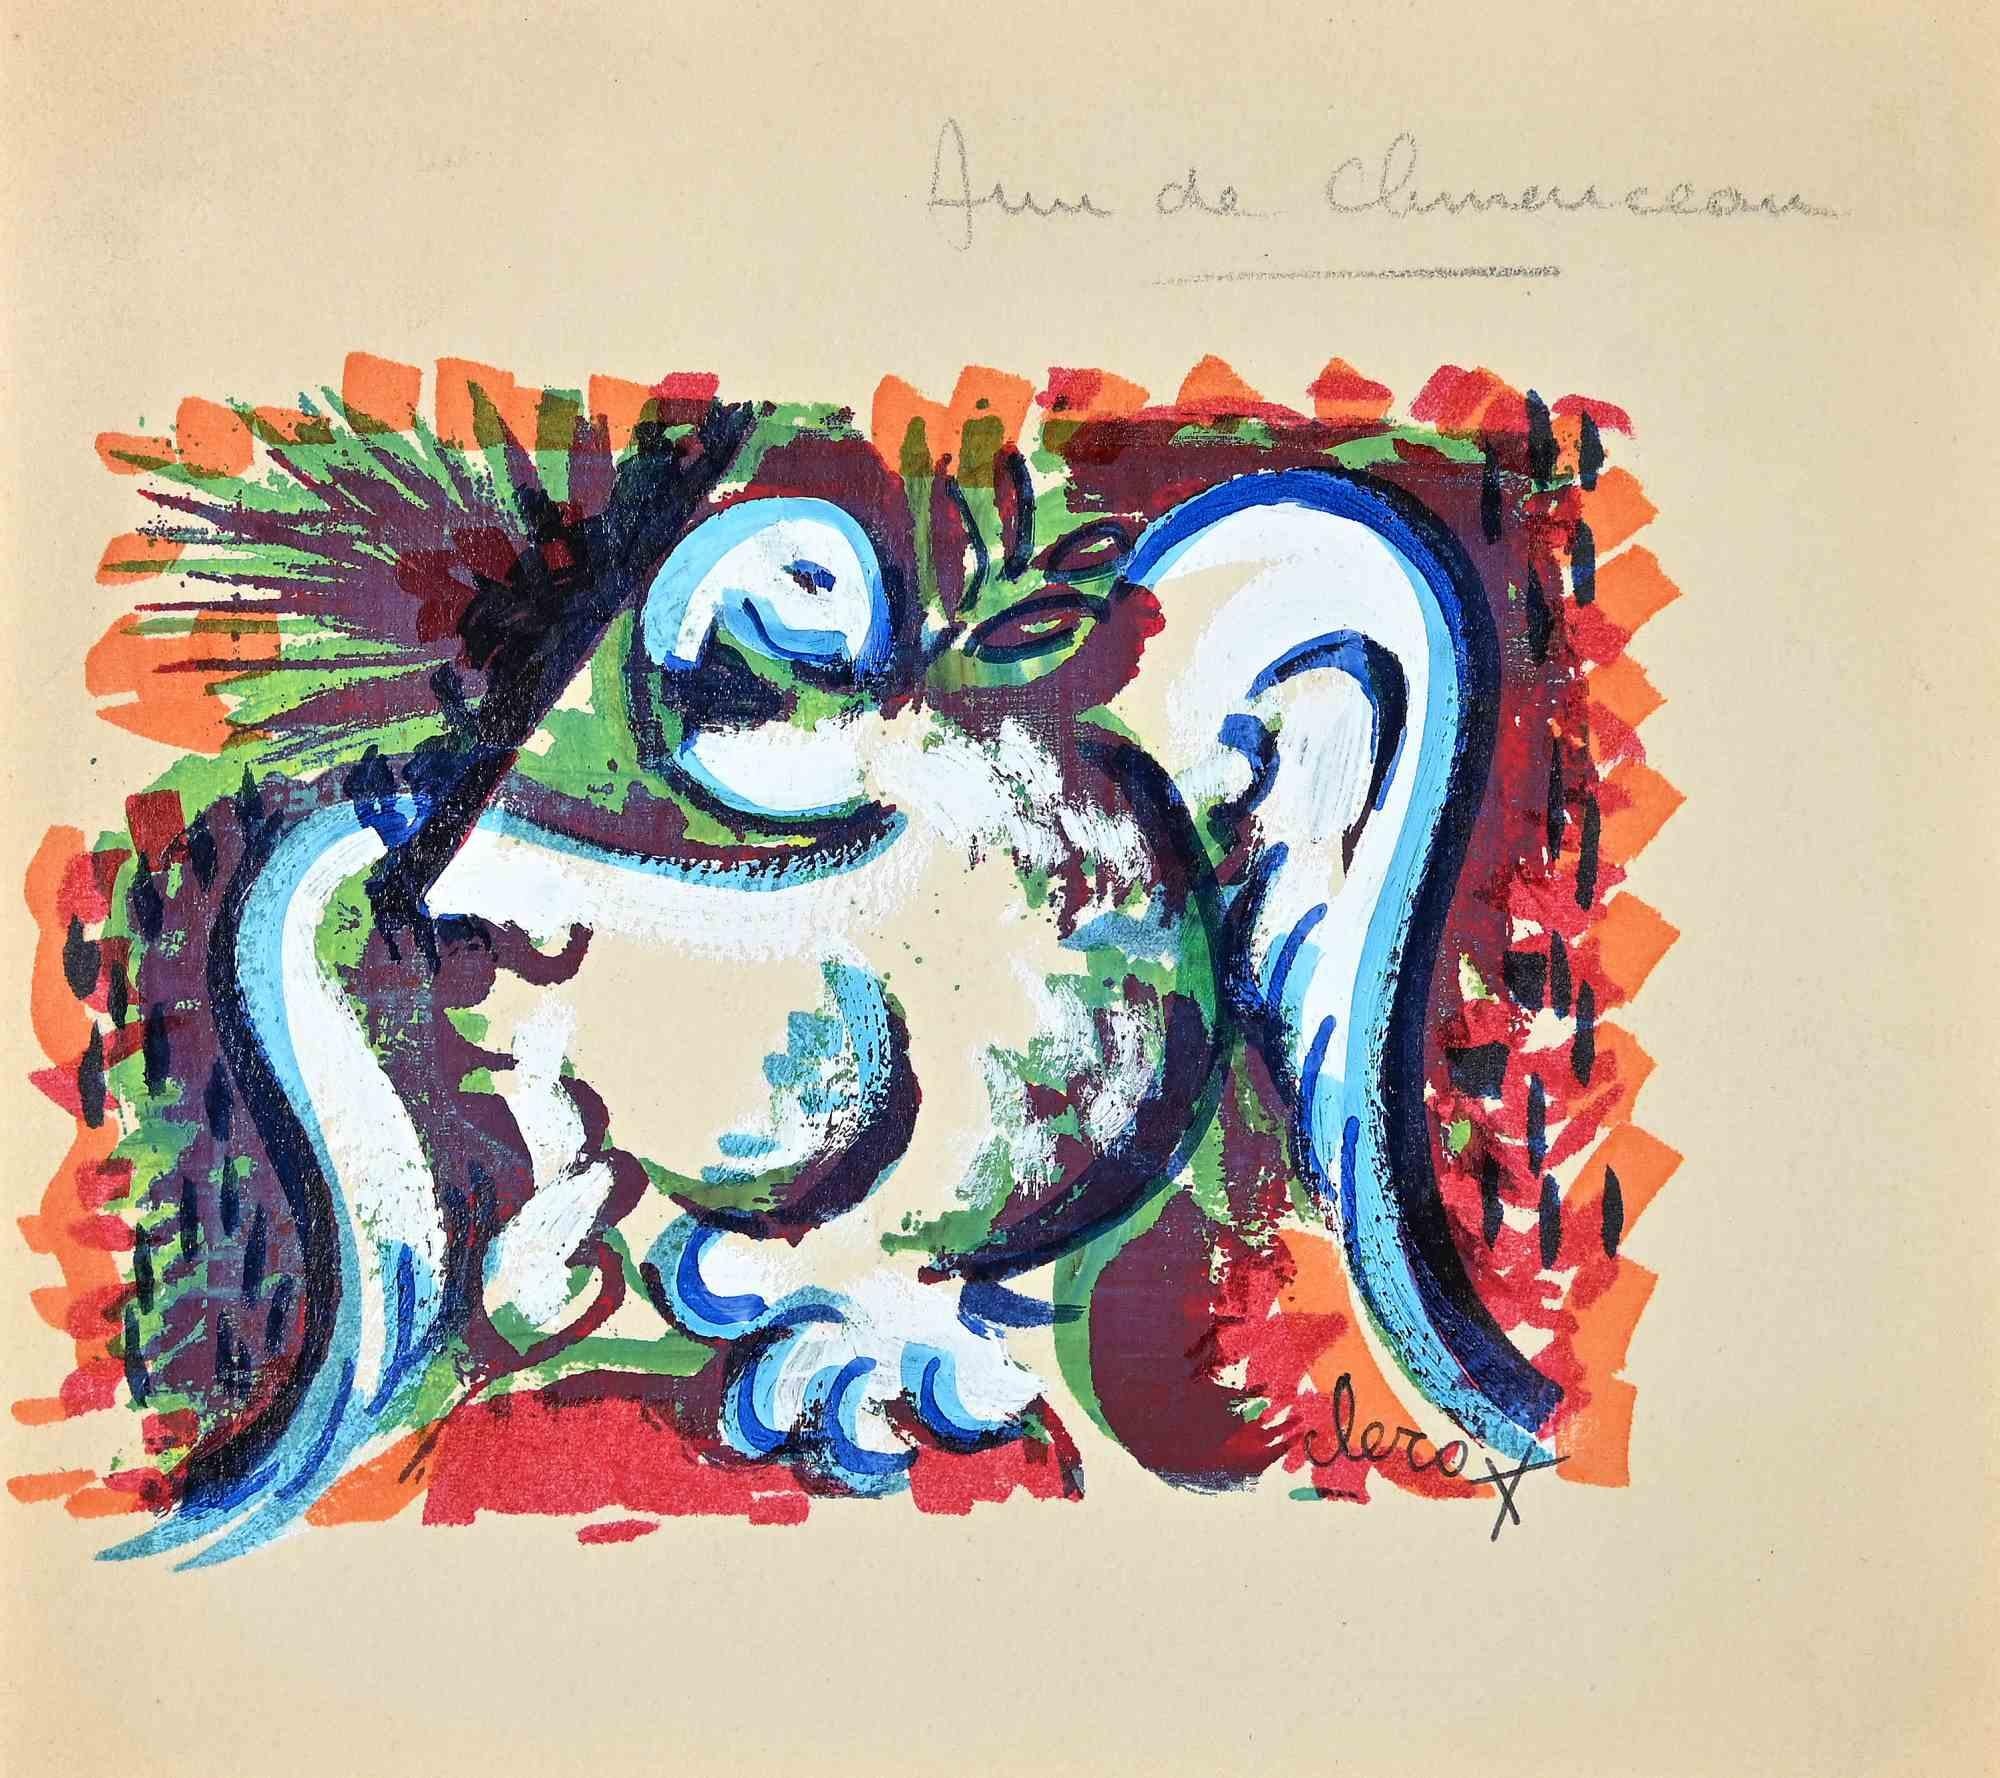 Composition is an original drawing in tempera on paper realized by Claude Clero in the 1970s.

Hand-signed .

Very good conditions.